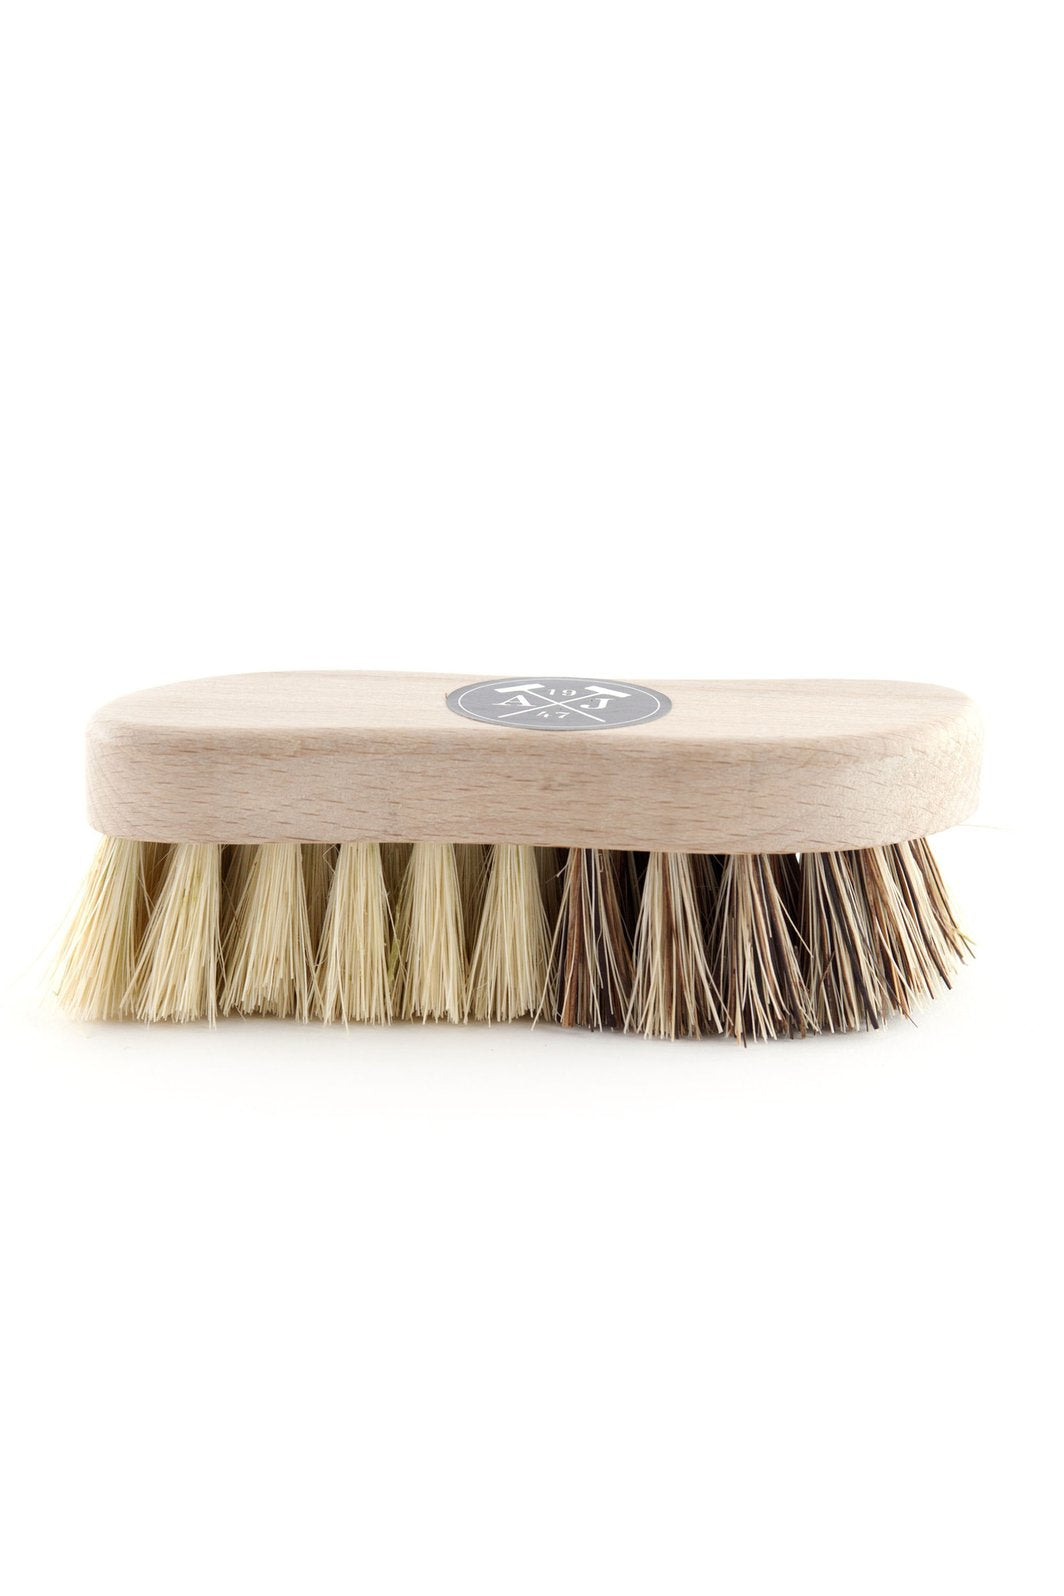 A wooden Andrée Jardin Tradition Vegetable Brush with stiff, natural bristles made from mixed vegetable fibers on a white background. The brush features a simple, oval design with a small, circular logo centered on the top.